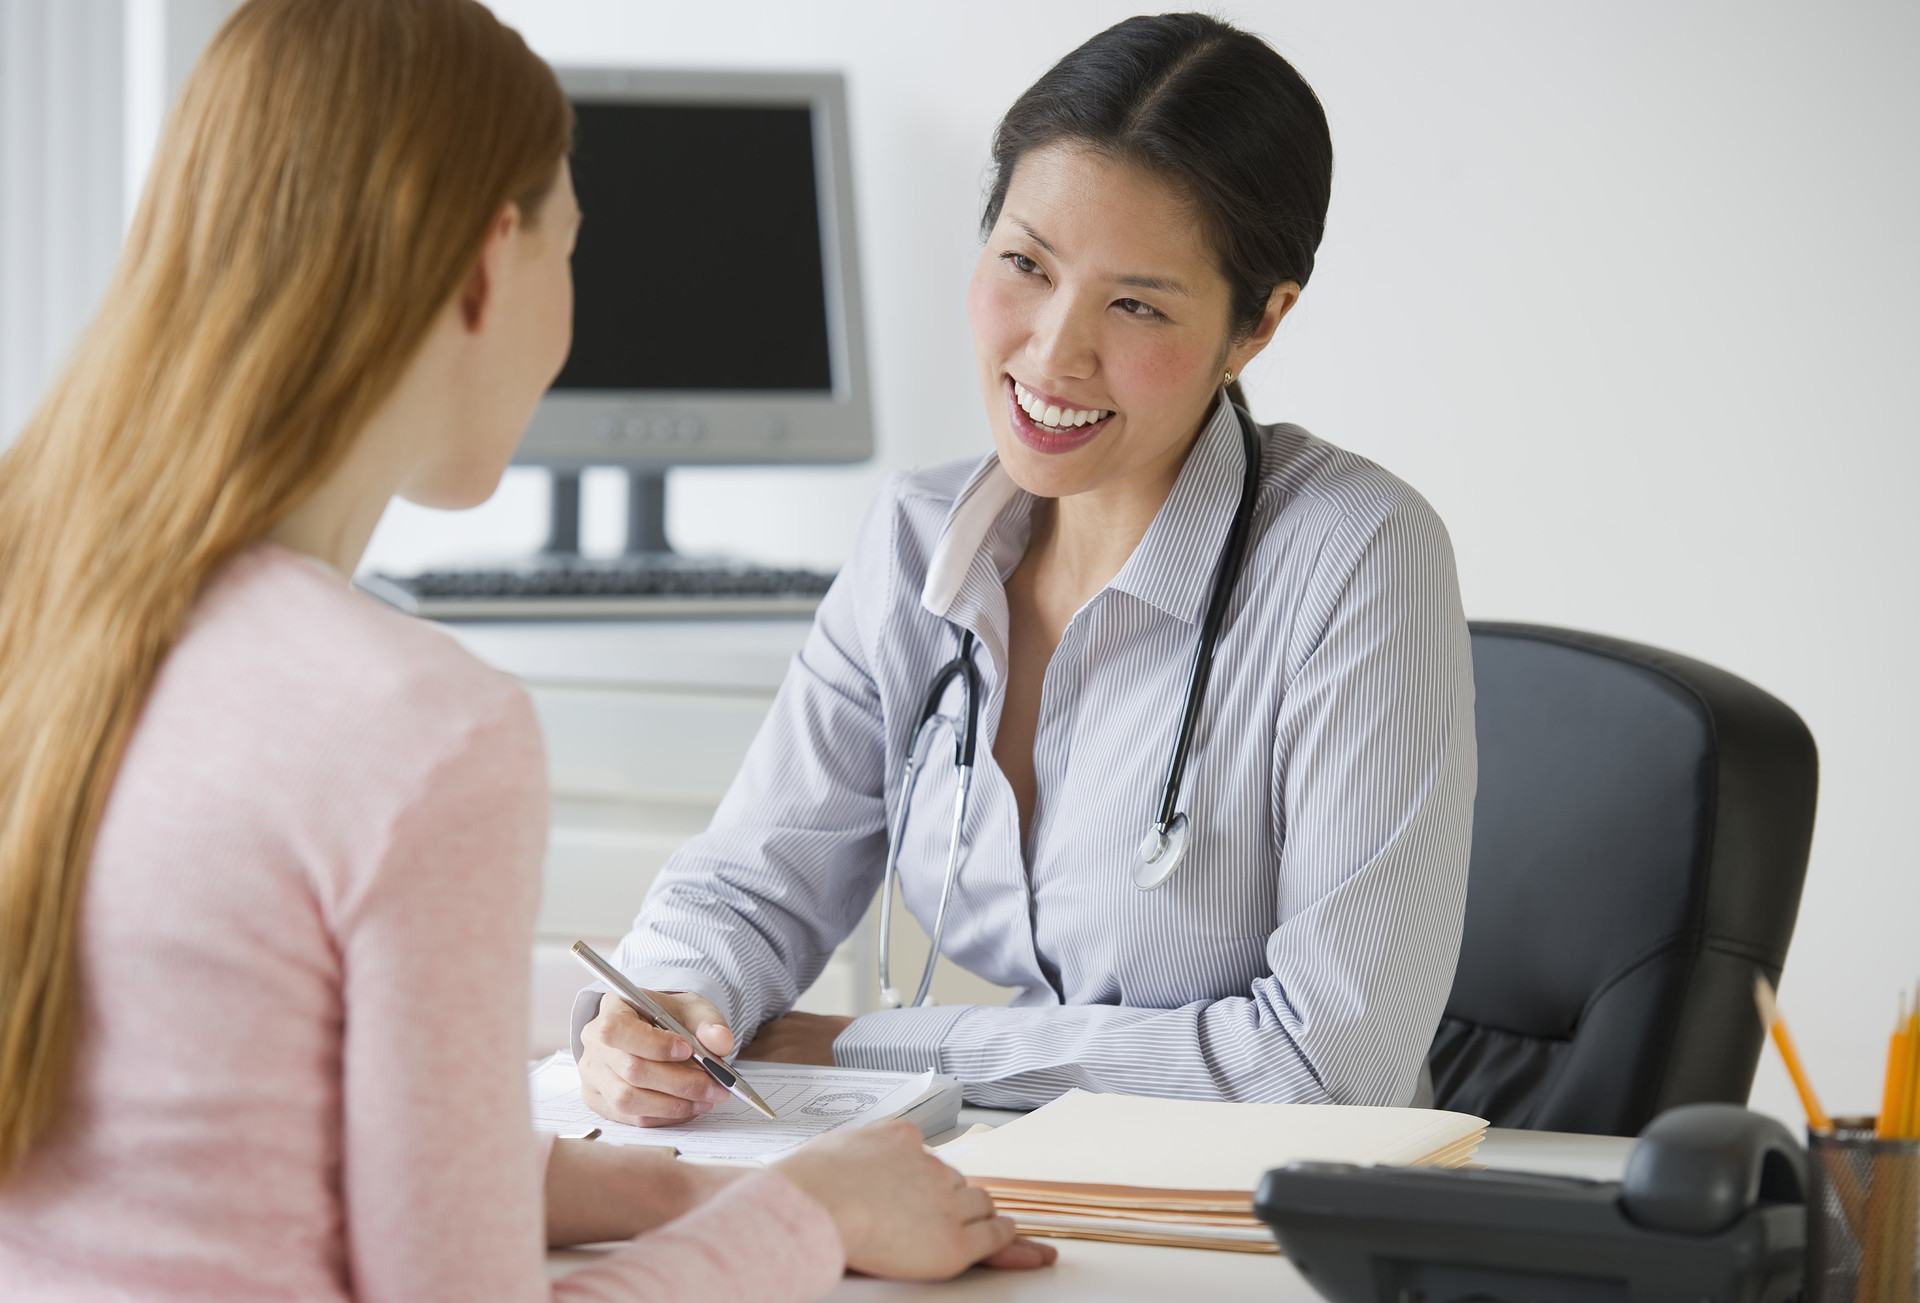 woman-consulting-doctor1.jpg